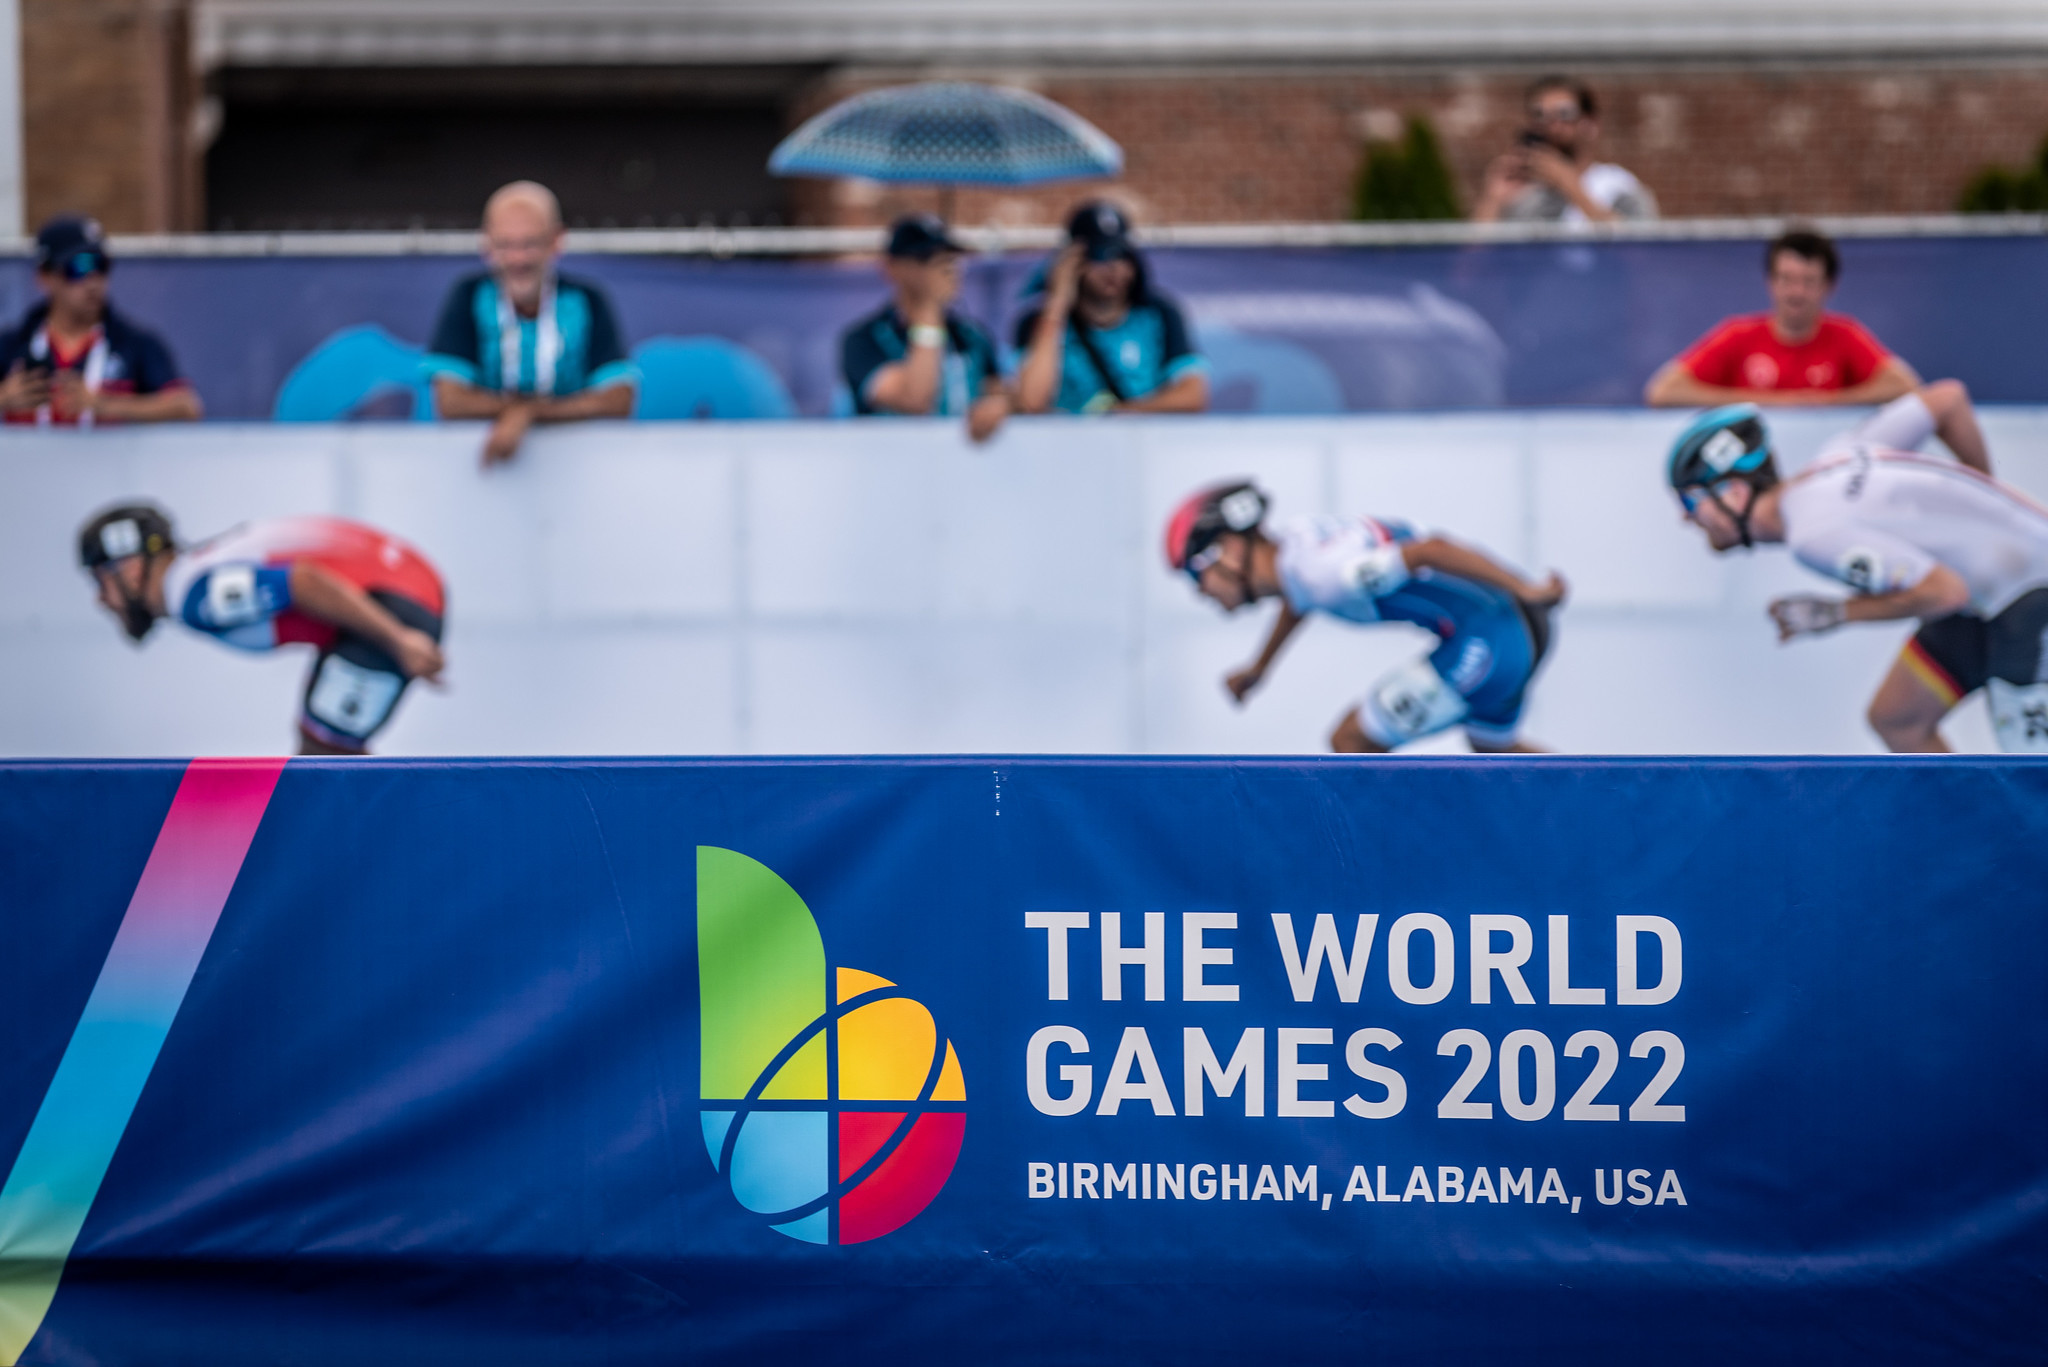 Six skating medal events were staged on the first day of The World Games ©The World Games